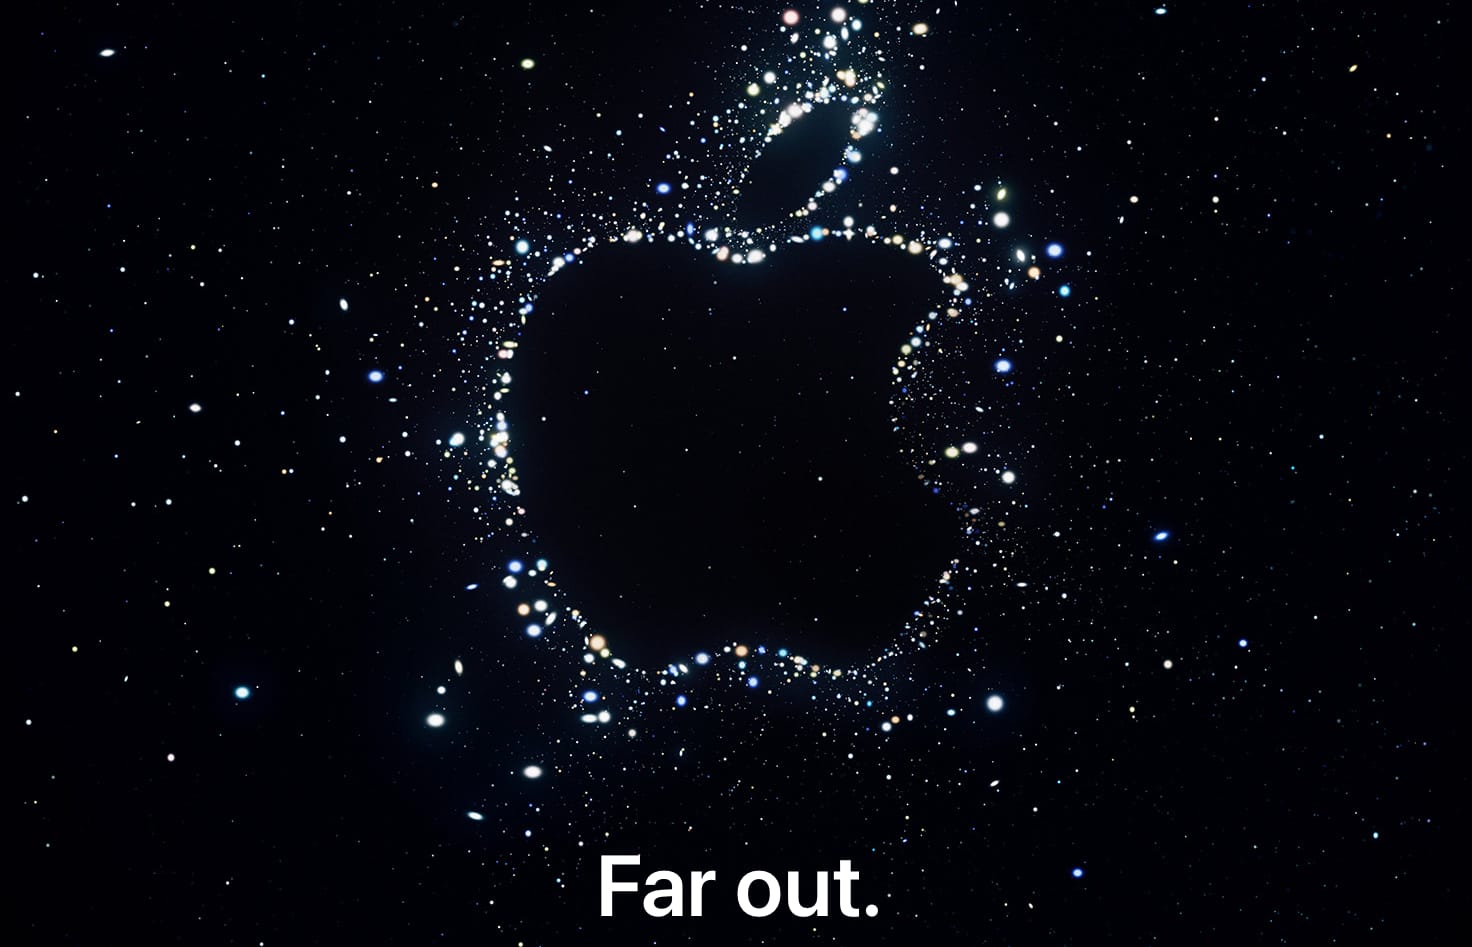 What to expect from Apple’s “Far out” event: iPhone 14, Apple Watch Pro, AirPods Pro 2 & more